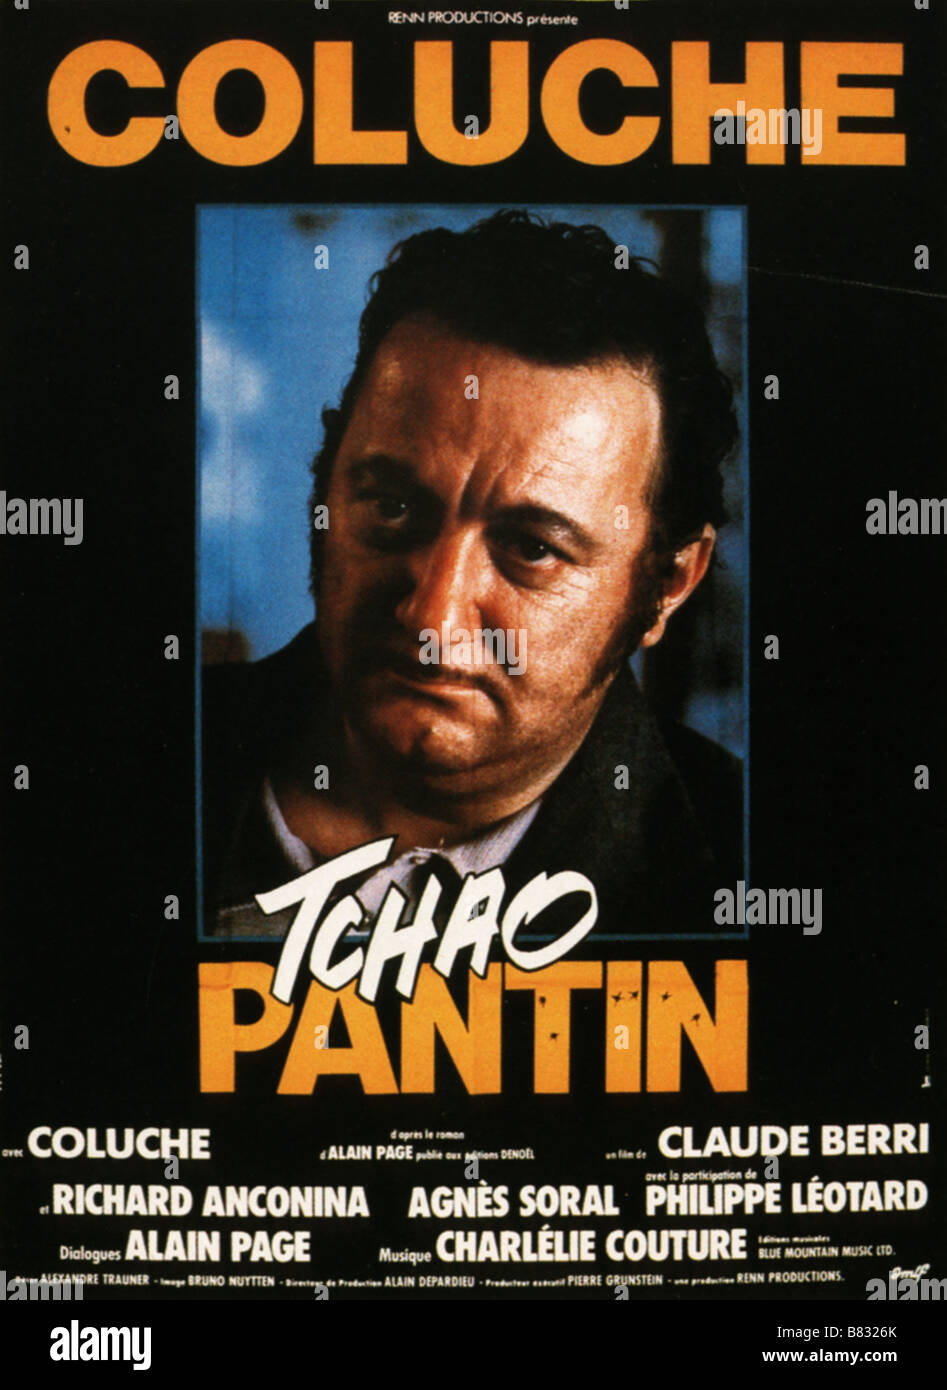 Tchao pantin  Year: 1983 - France Director: Claude Berri Coluche Movie poster (Fr) Stock Photo